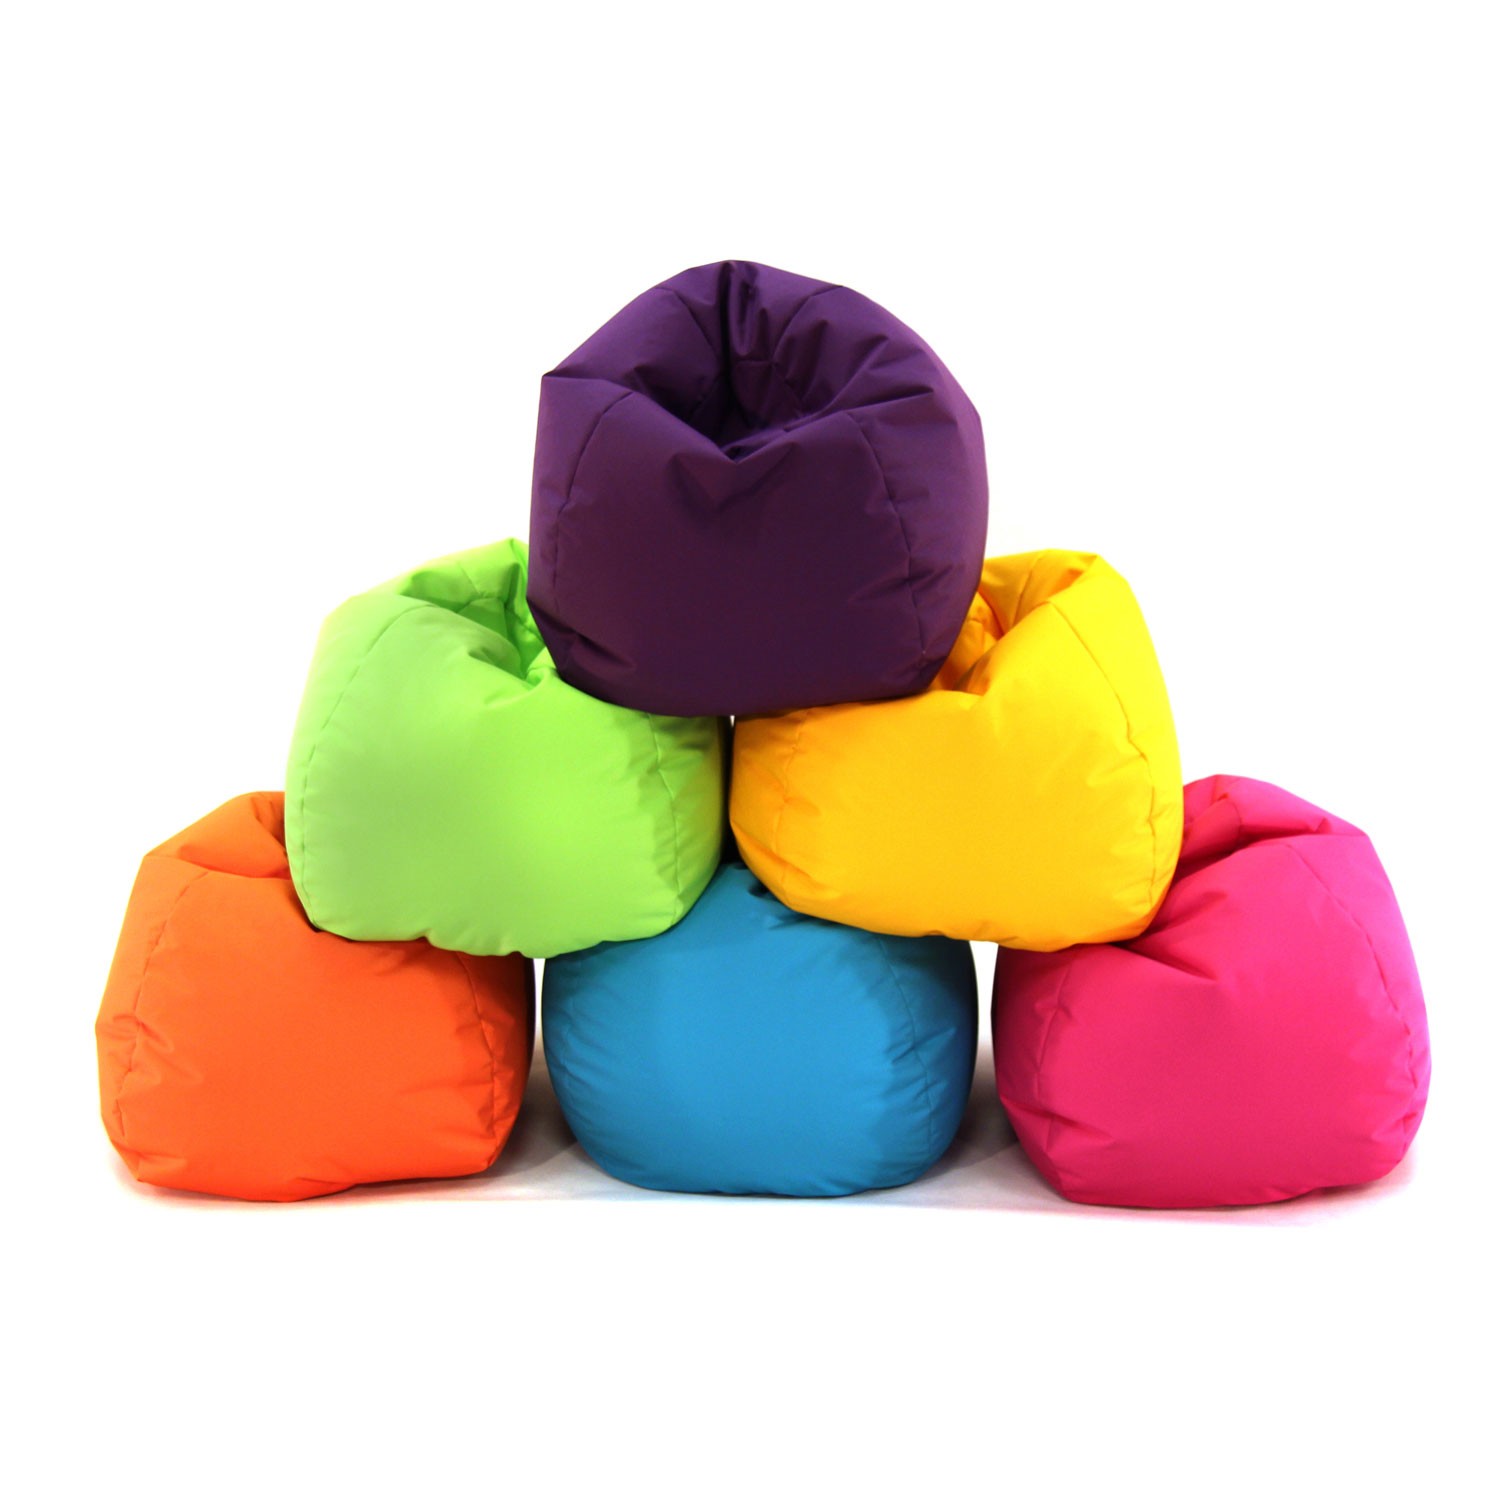 What Are The Different Uses Of Bean Bags In Perth